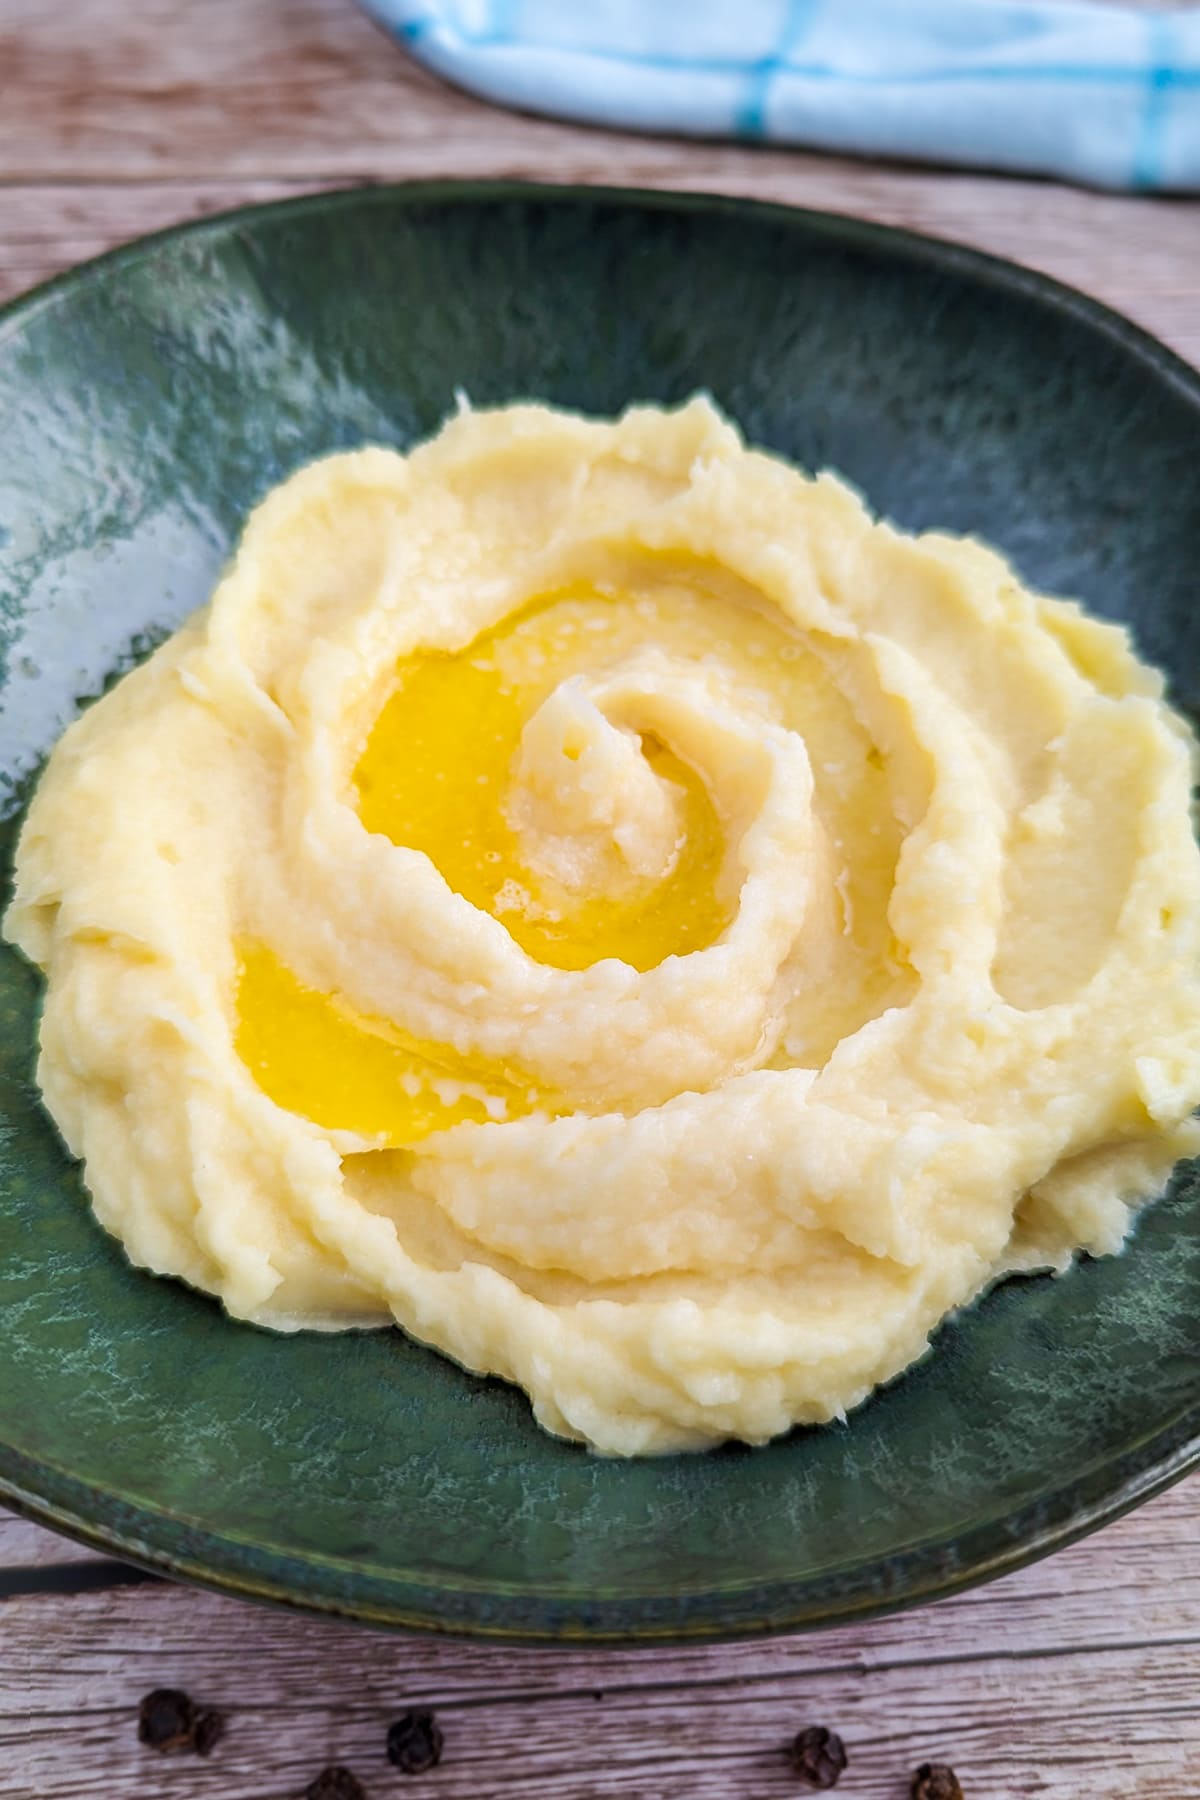 Mashed parsnips puree with melted butter on a green vintage plate.